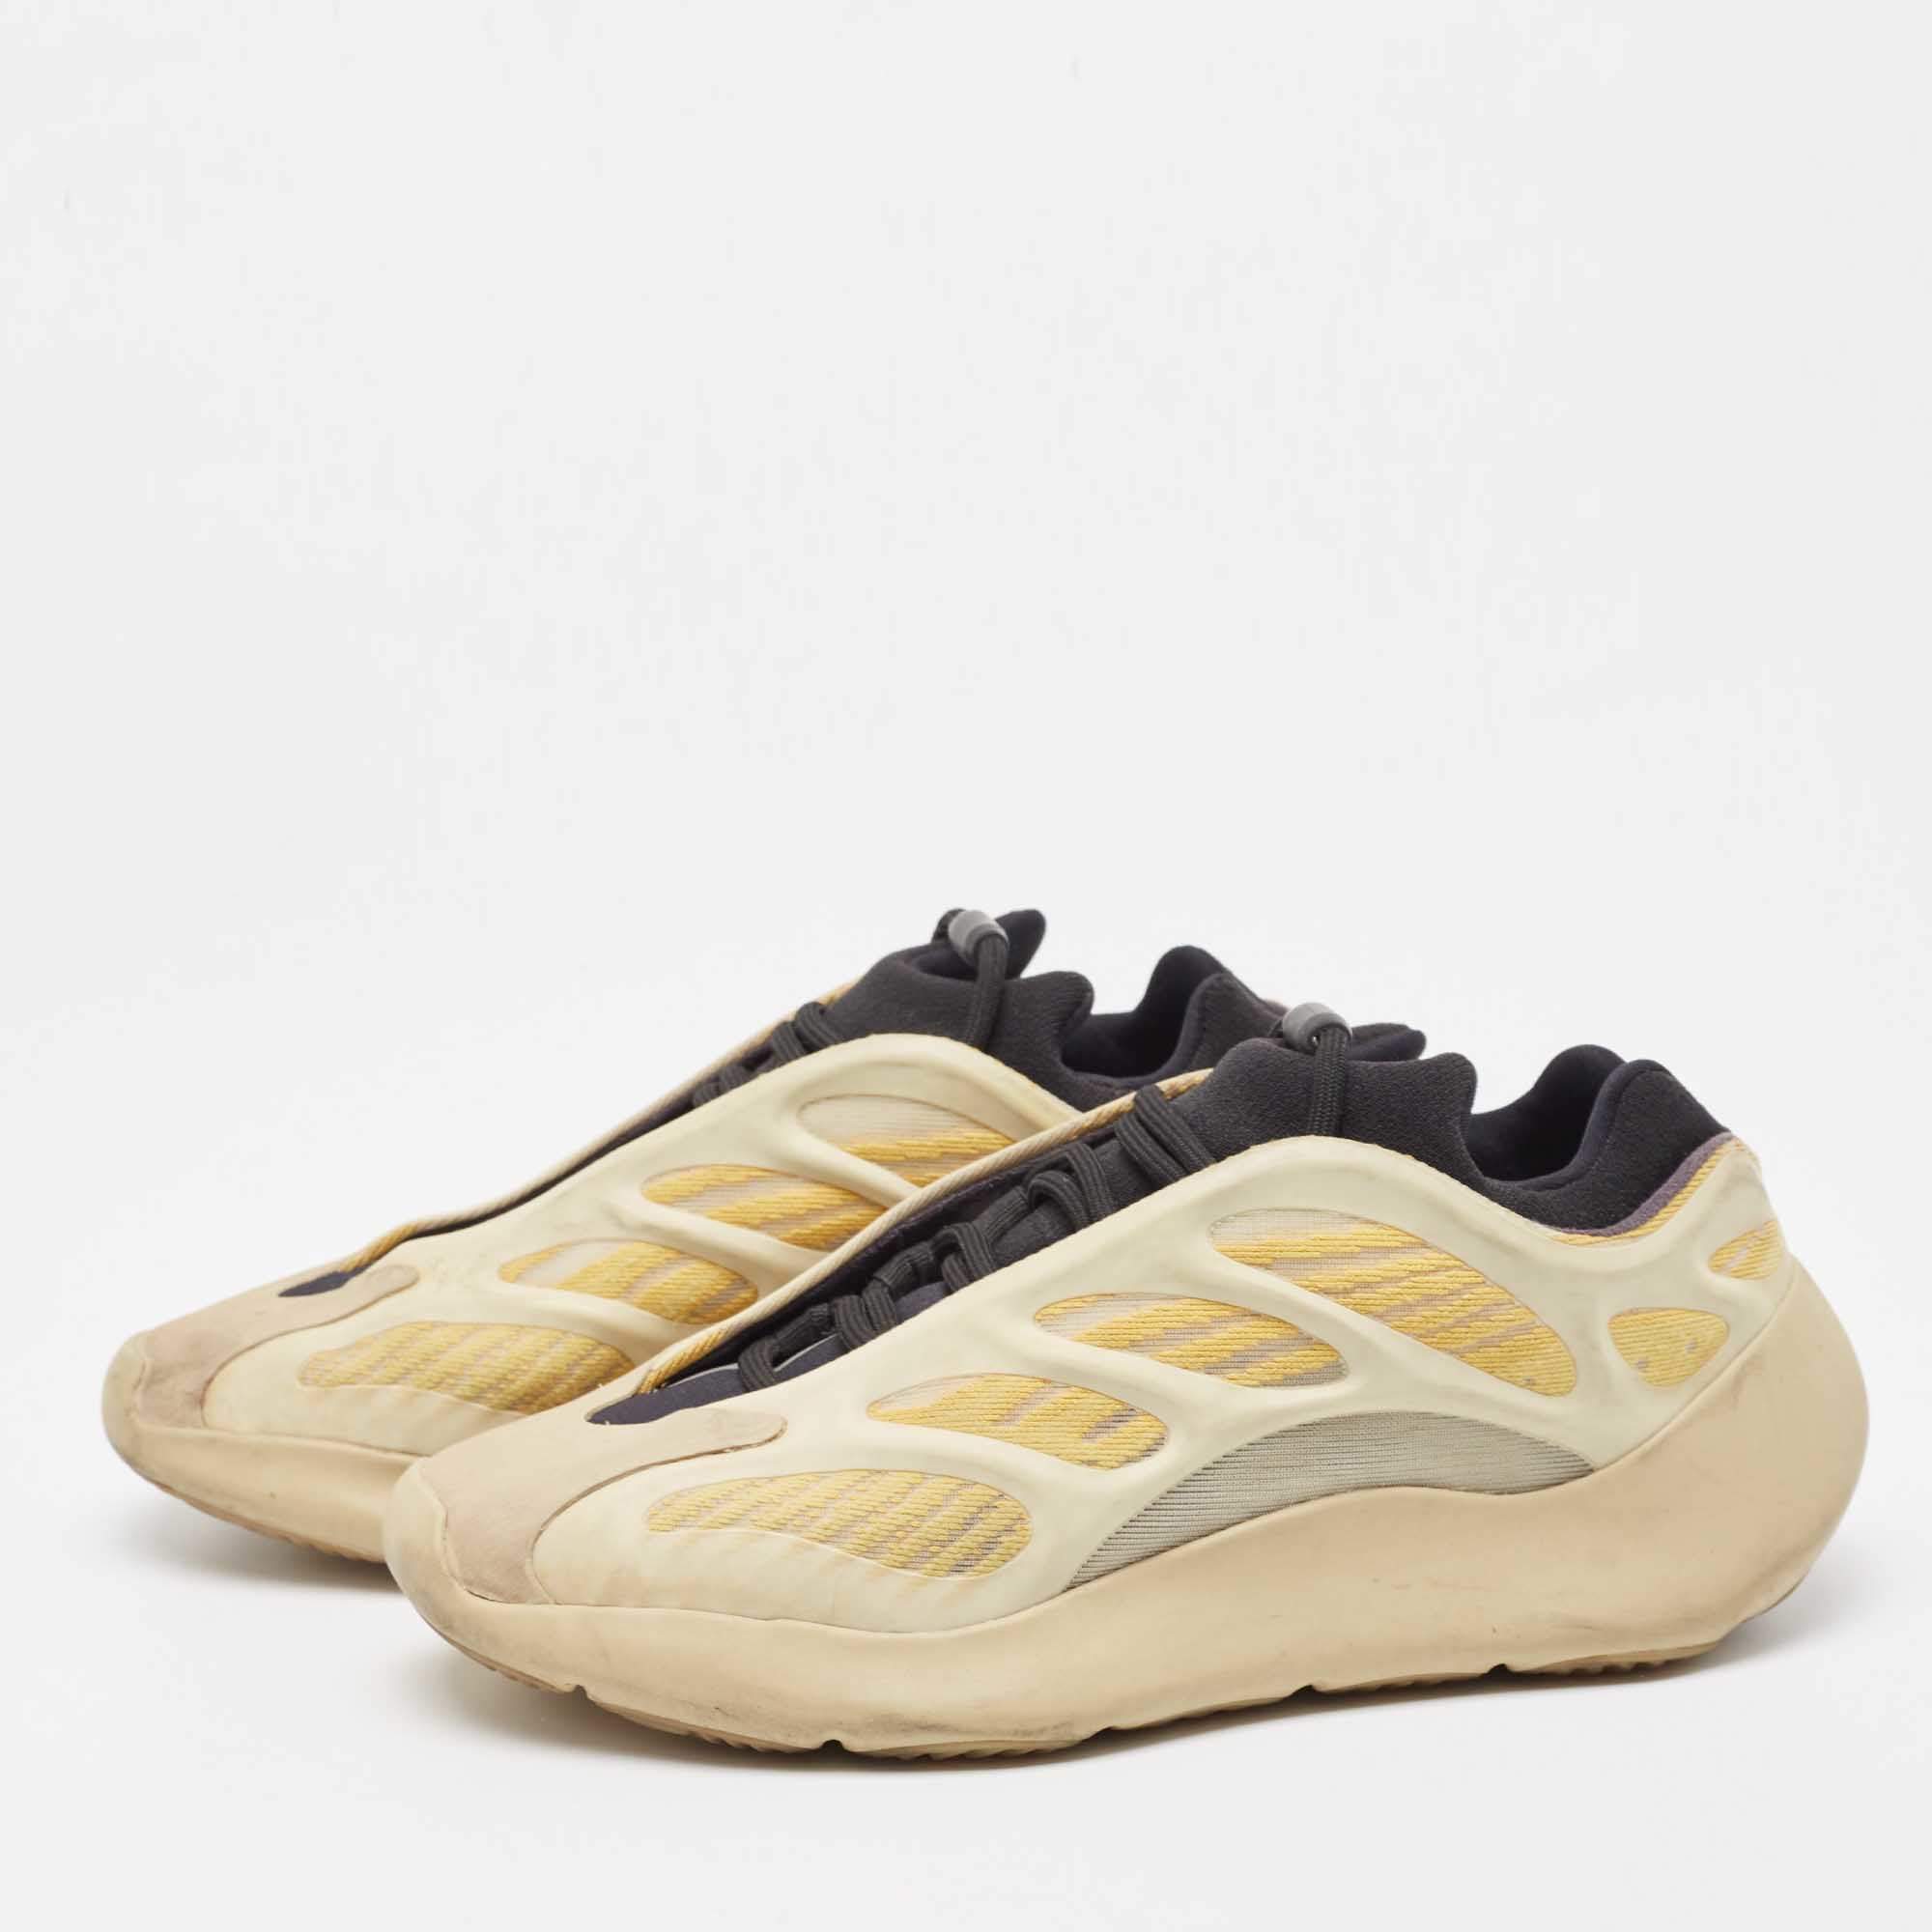 Yeezy x Adidas Yellow/Beige Rubber and Fabric Yeezy 700 V3 Safflower  Sneakers Size 41 1/3